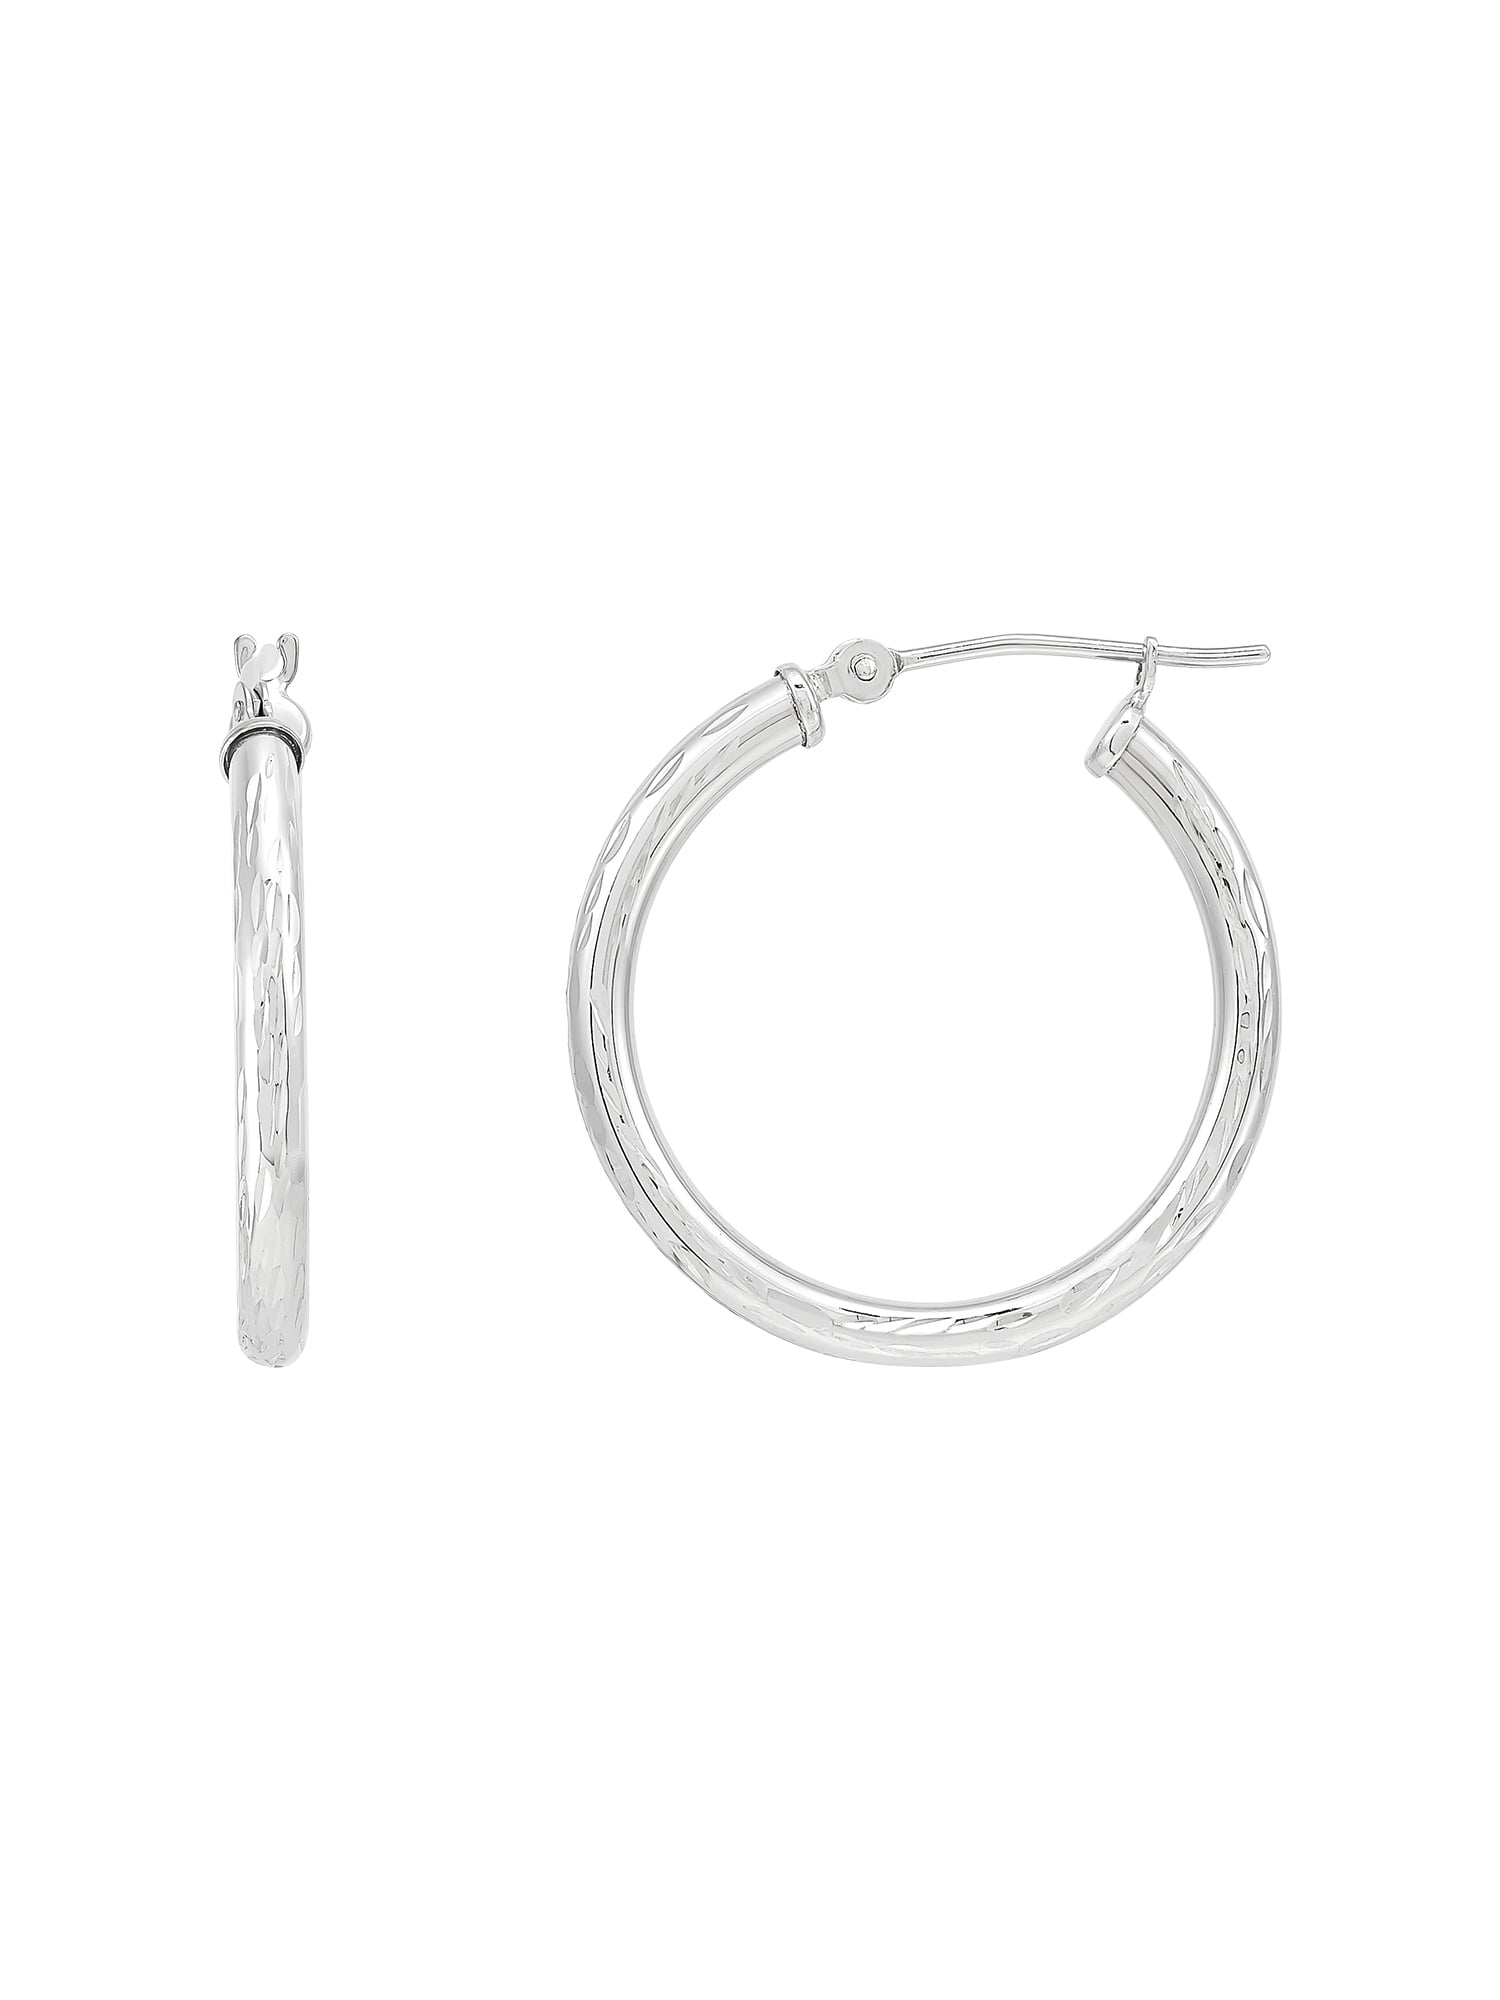 FREE SHIPPING! Gift Box 10Kt White Gold 14MM Small Hoop Earrings 